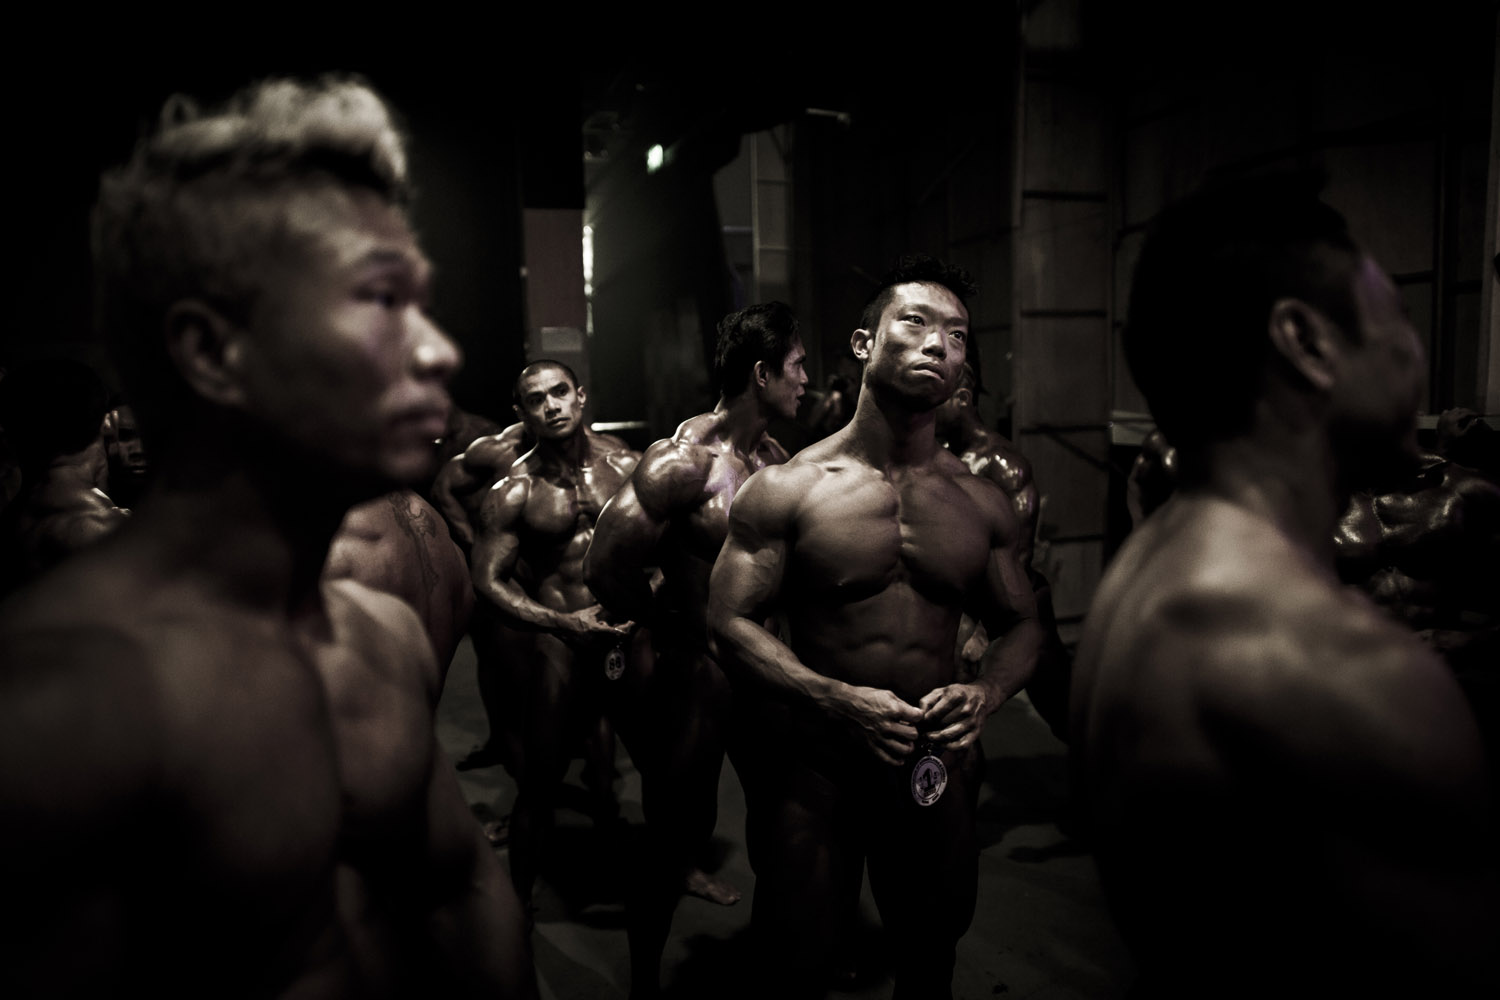 July 15, 2012. Competitors wait backstage during the 2012 International Bodybuilding and Fitness Invitation Championship in Hong Kong.